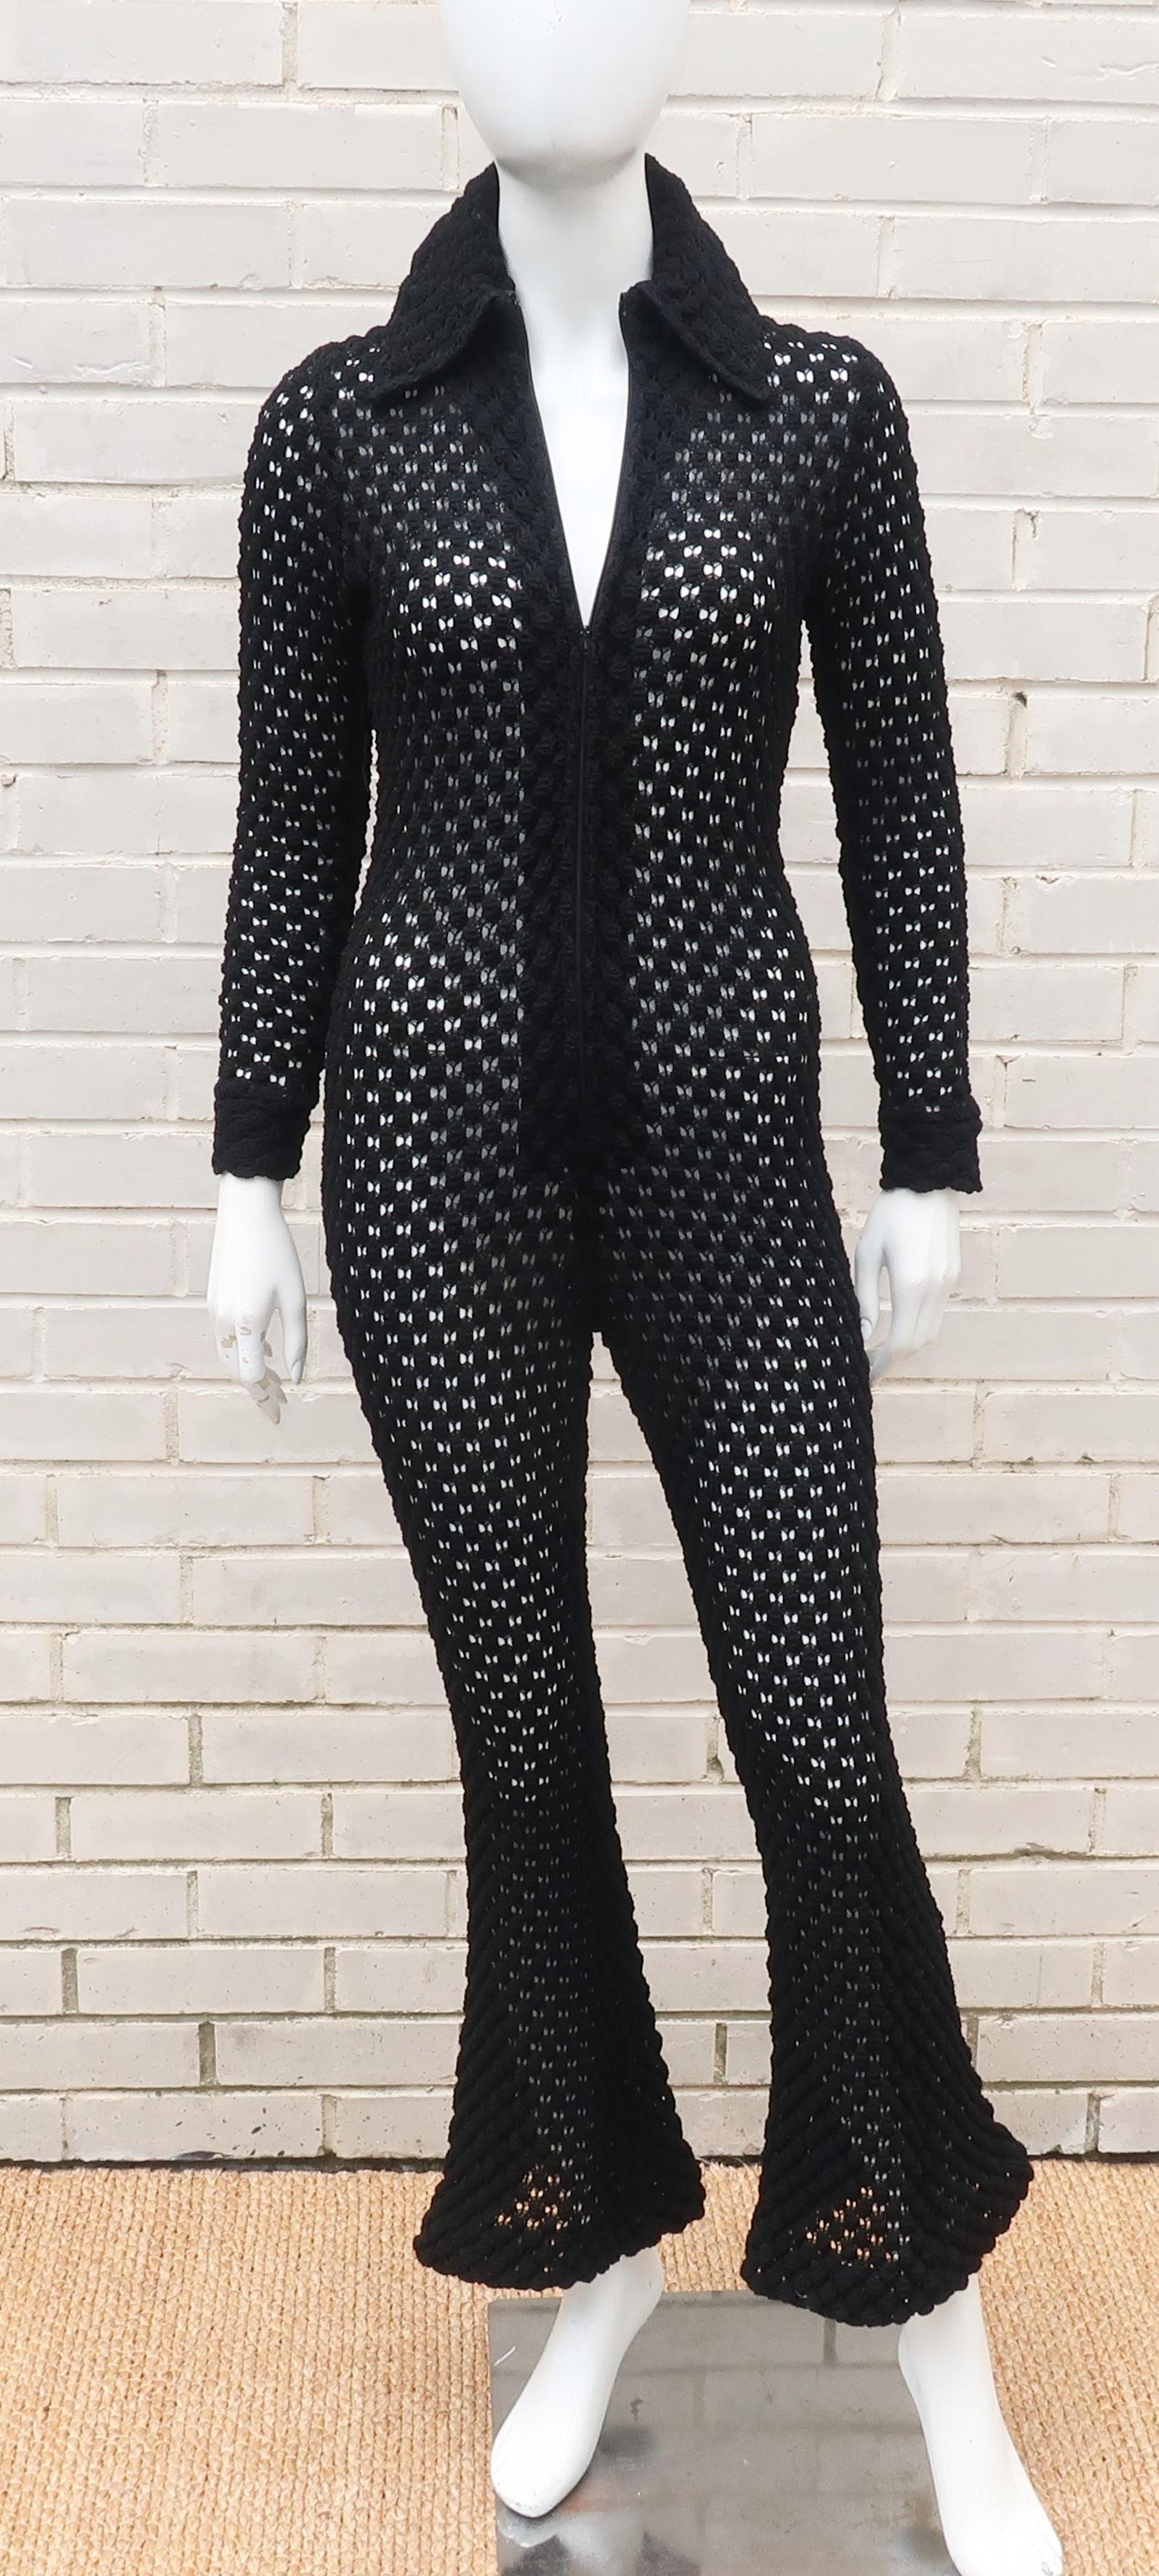 Boogie nights!  A period perfect 1970's popcorn crochet knit black jumpsuit with a zip up front, pointy collar and bell bottom pants hem.  Wear it with black undergarments or go for the nude illusion look.  Comfortable for lounging or disco dancing